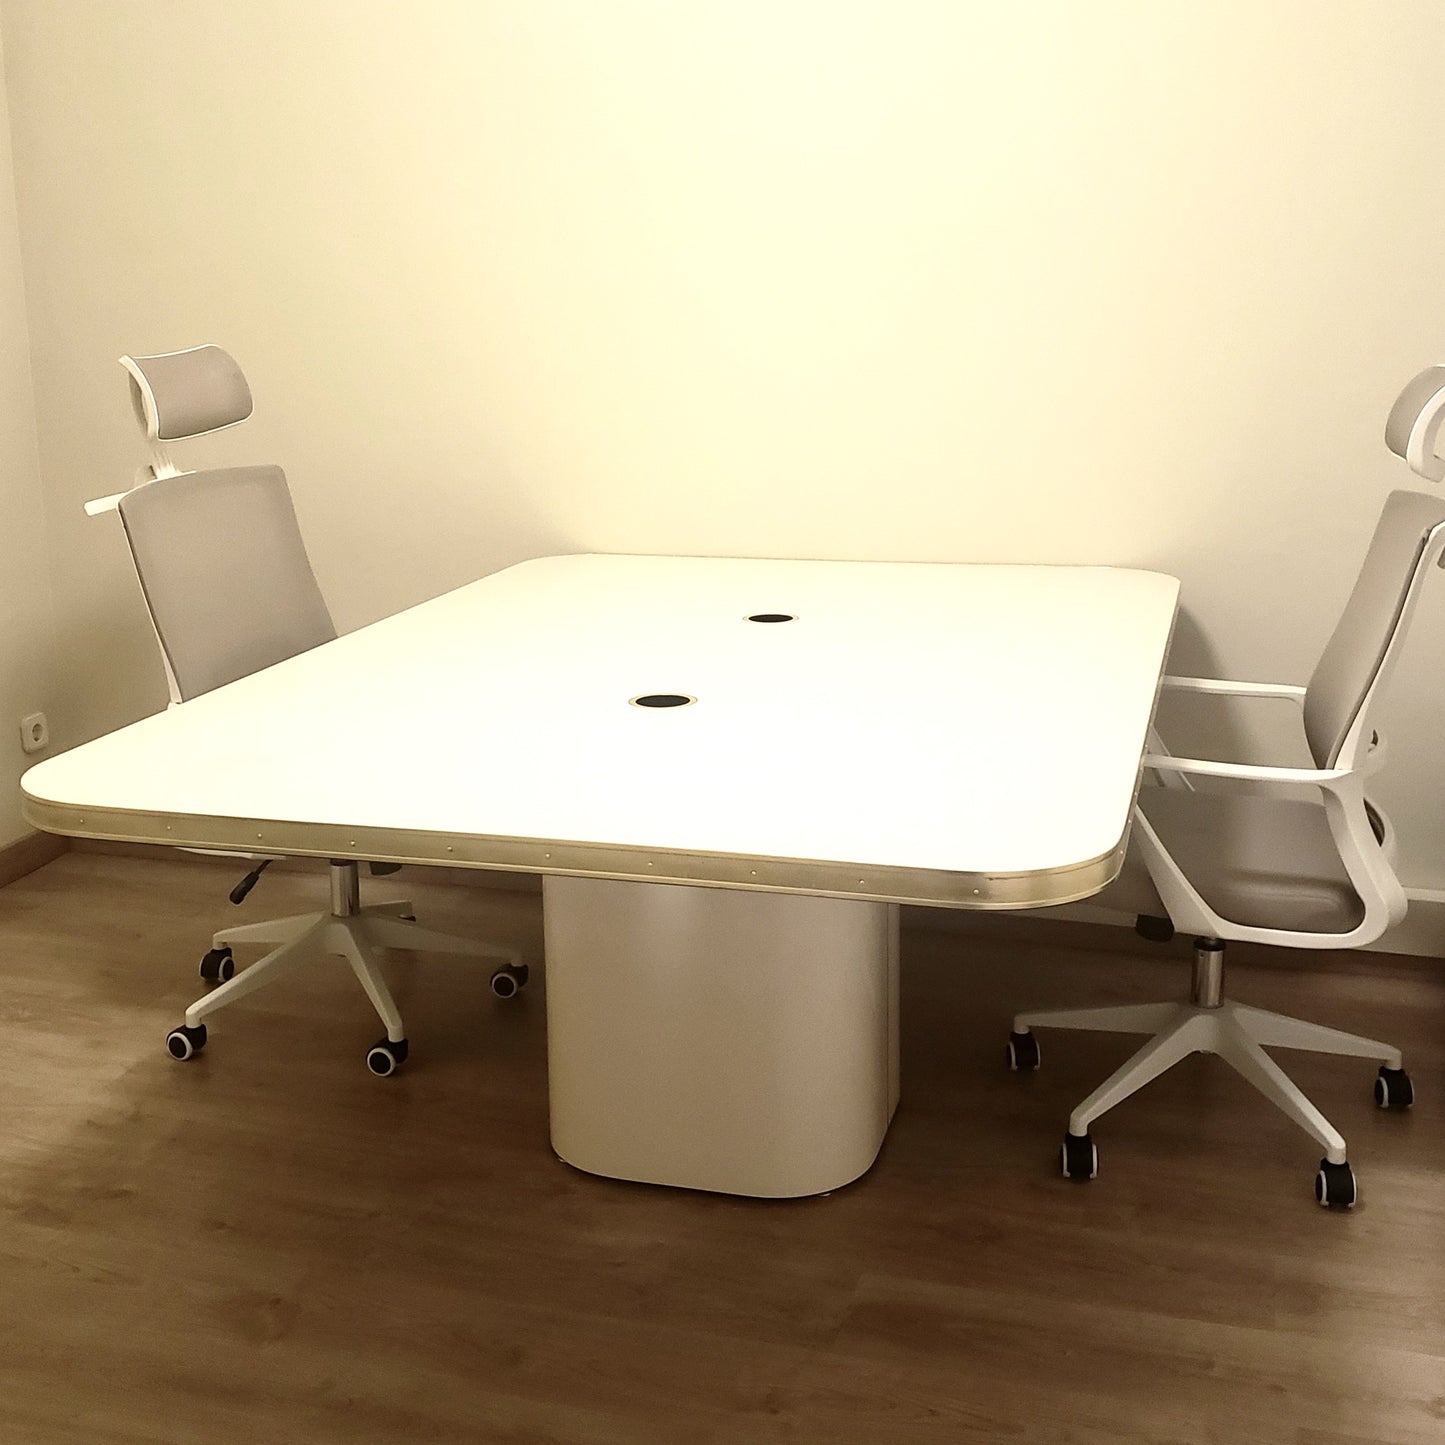 Customized Conference Room Tables & Office Desk Tables, Handcrafted in Spain